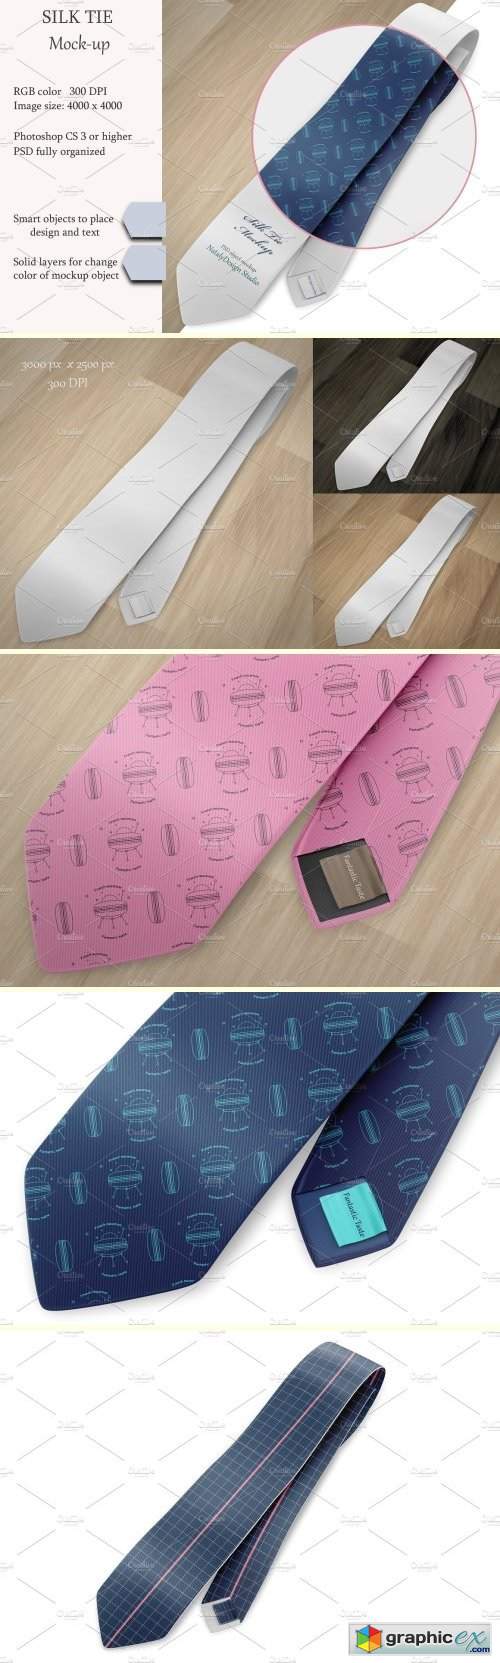 Download Silk tie Mockup. Product mockup » Free Download Vector Stock Image Photoshop Icon